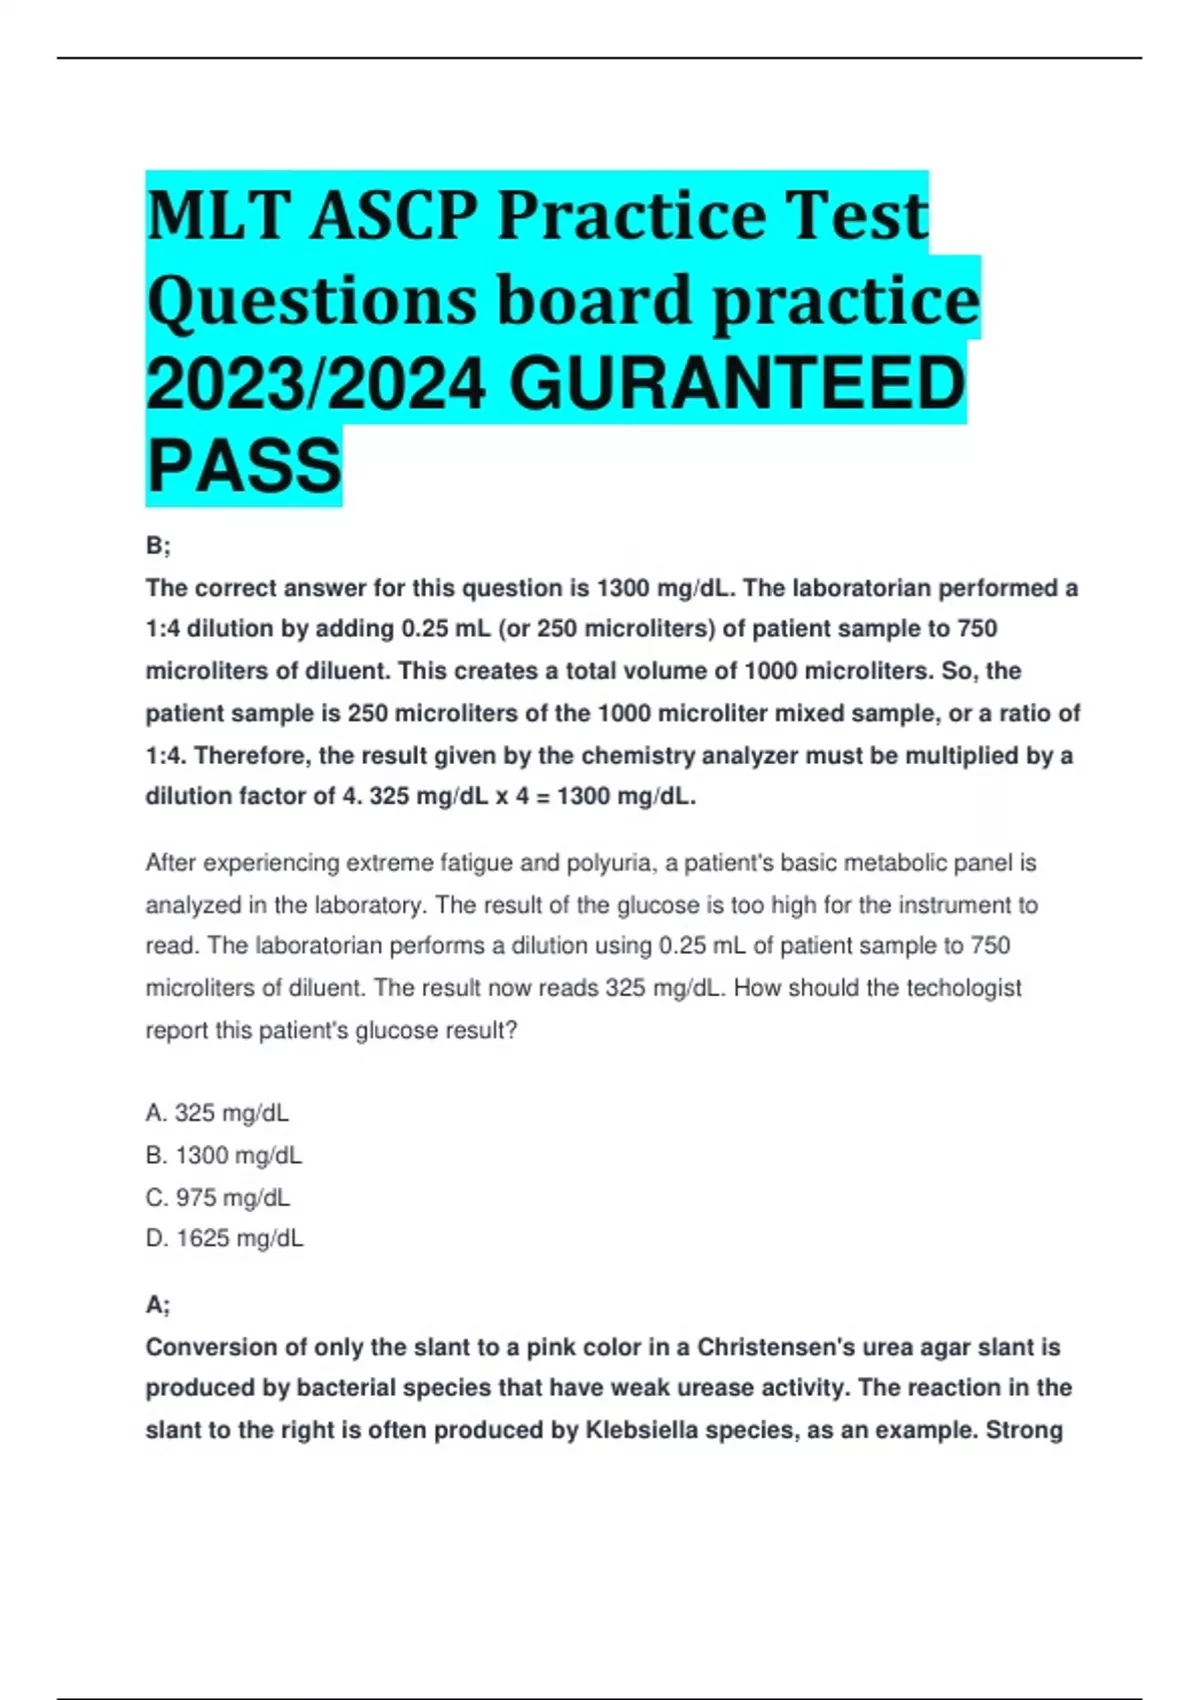 MLT ASCP Practice Test Questions board practice 2023/2024 GURANTEED